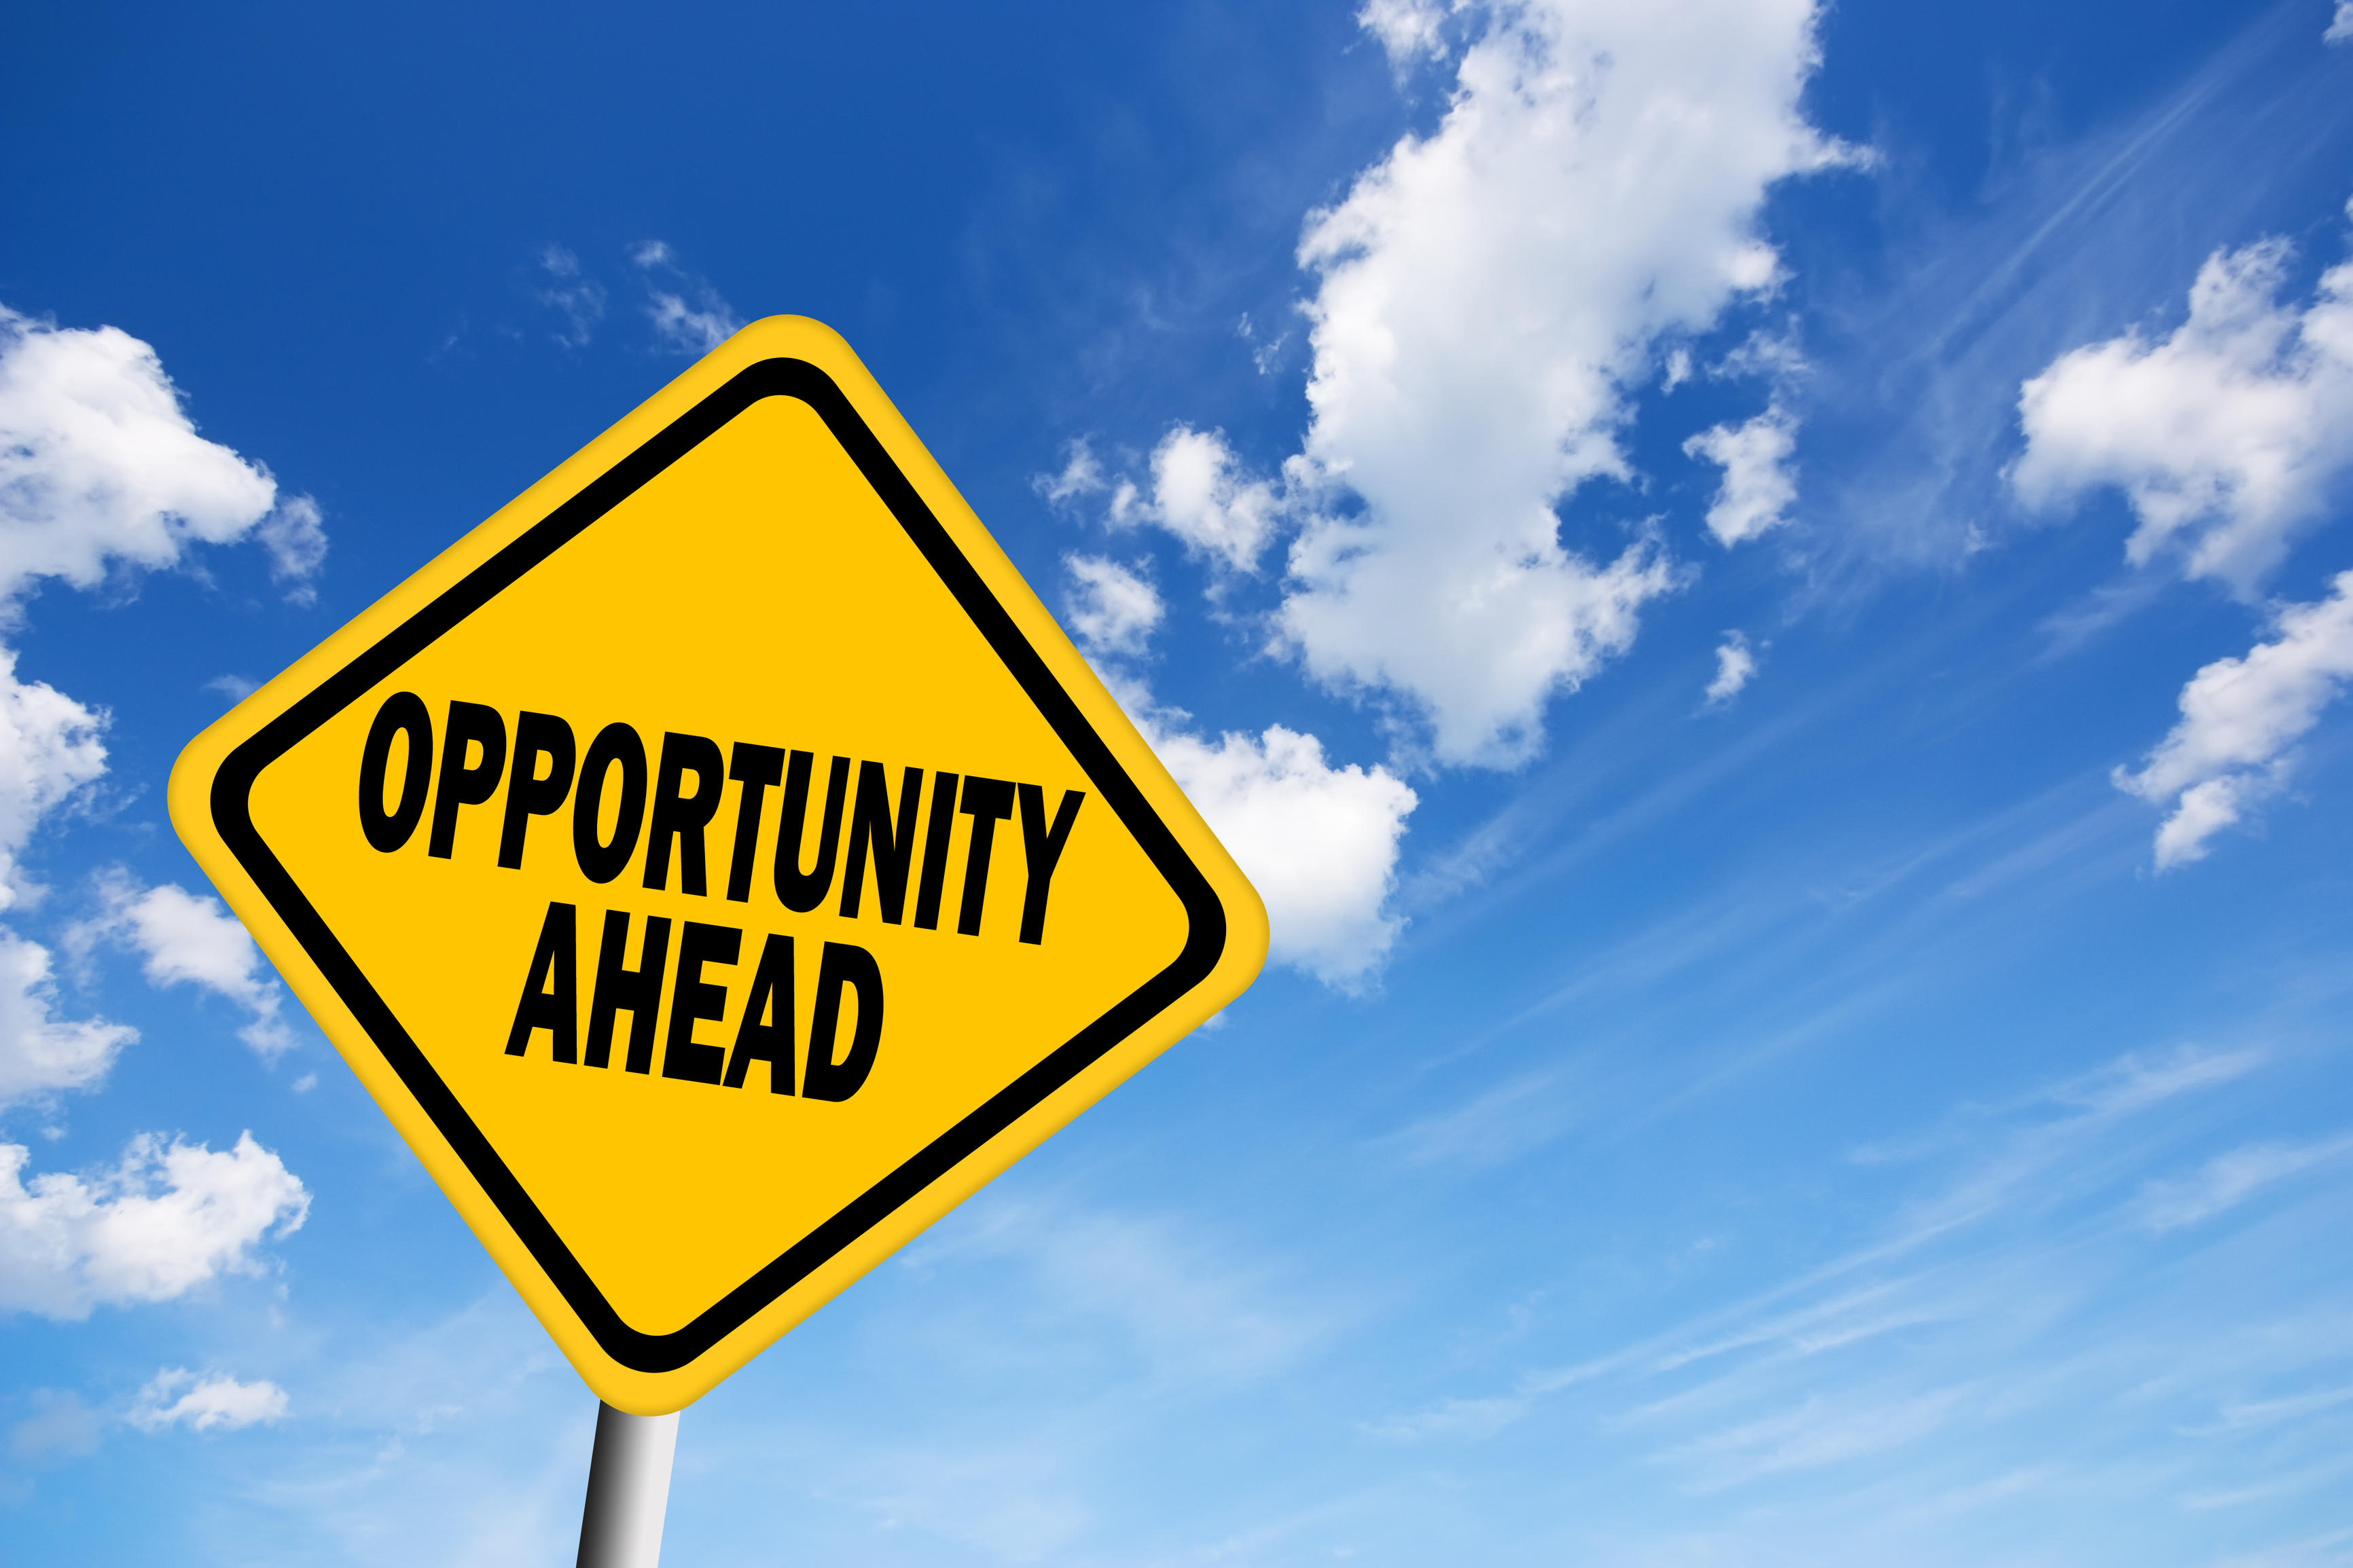 image showing opportunity ahead sign representing photo booth franchise opportunity